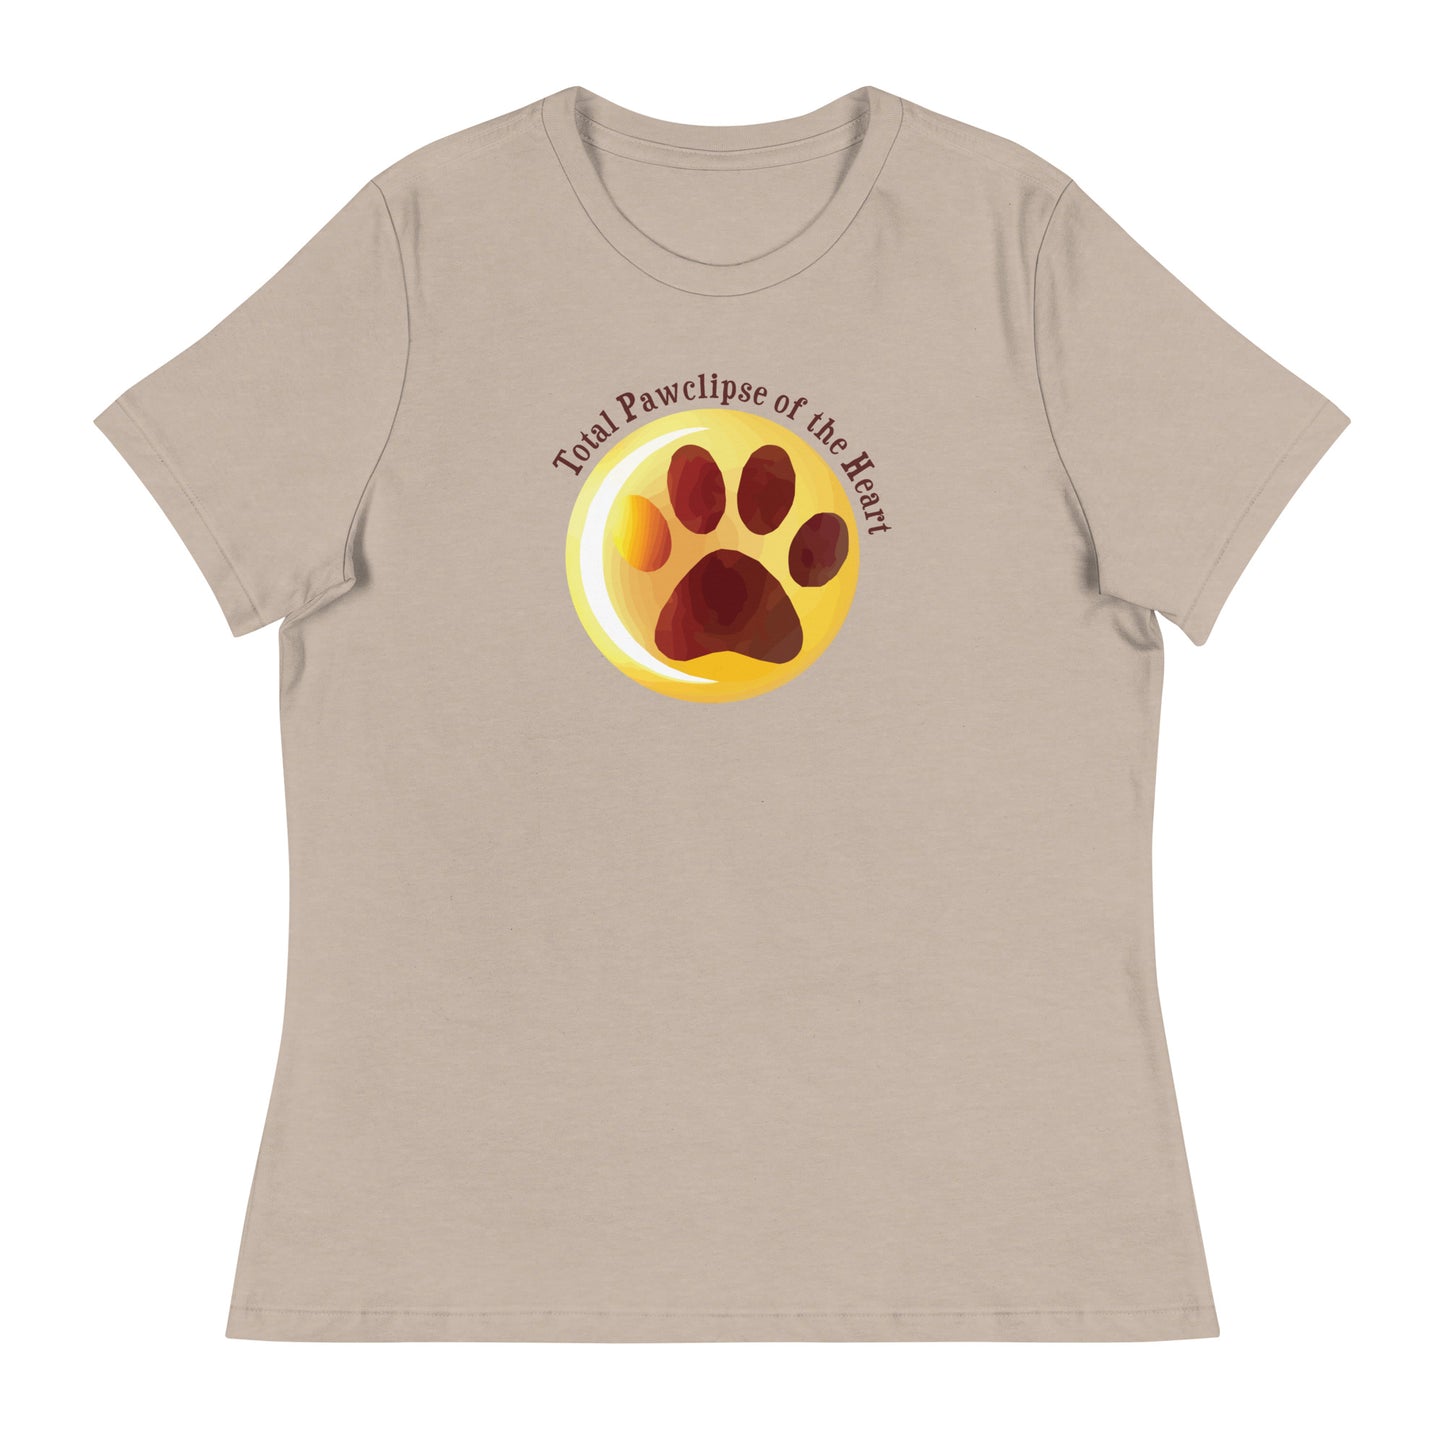 Total Pawclipse Of The Heart Women's Relaxed T-Shirt